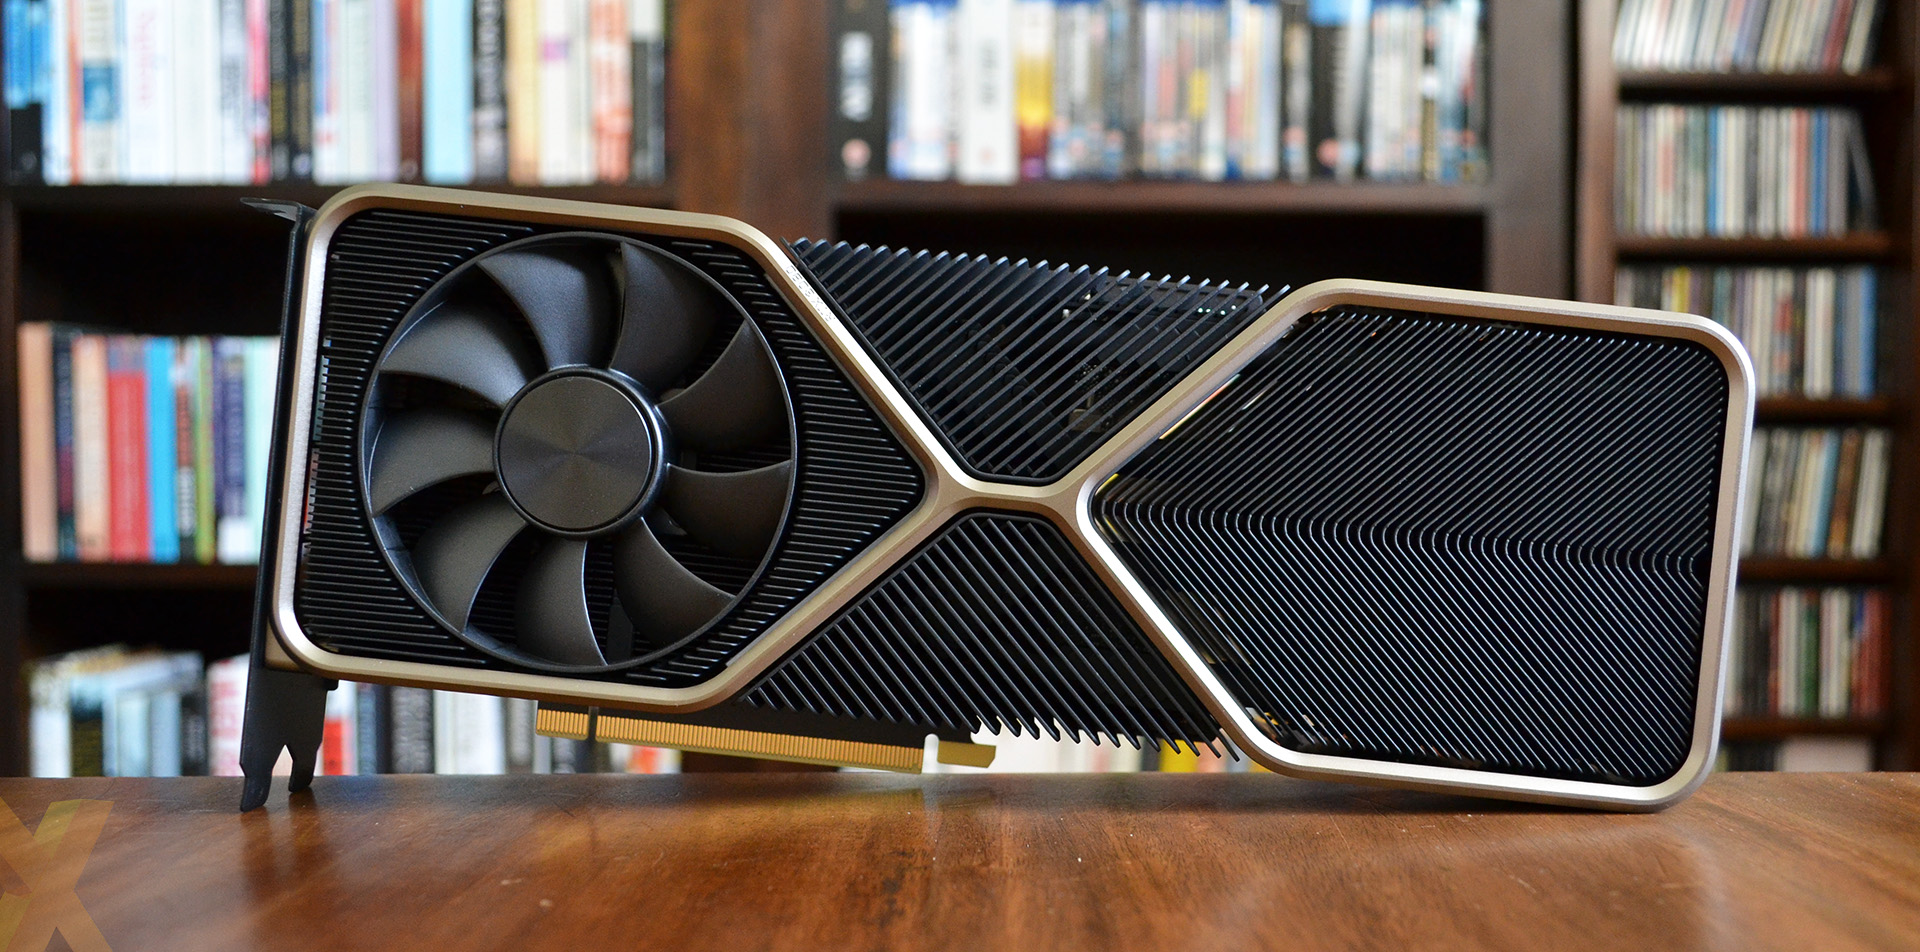 Nvidia GeForce RTX 3080 Founders Edition examined ...